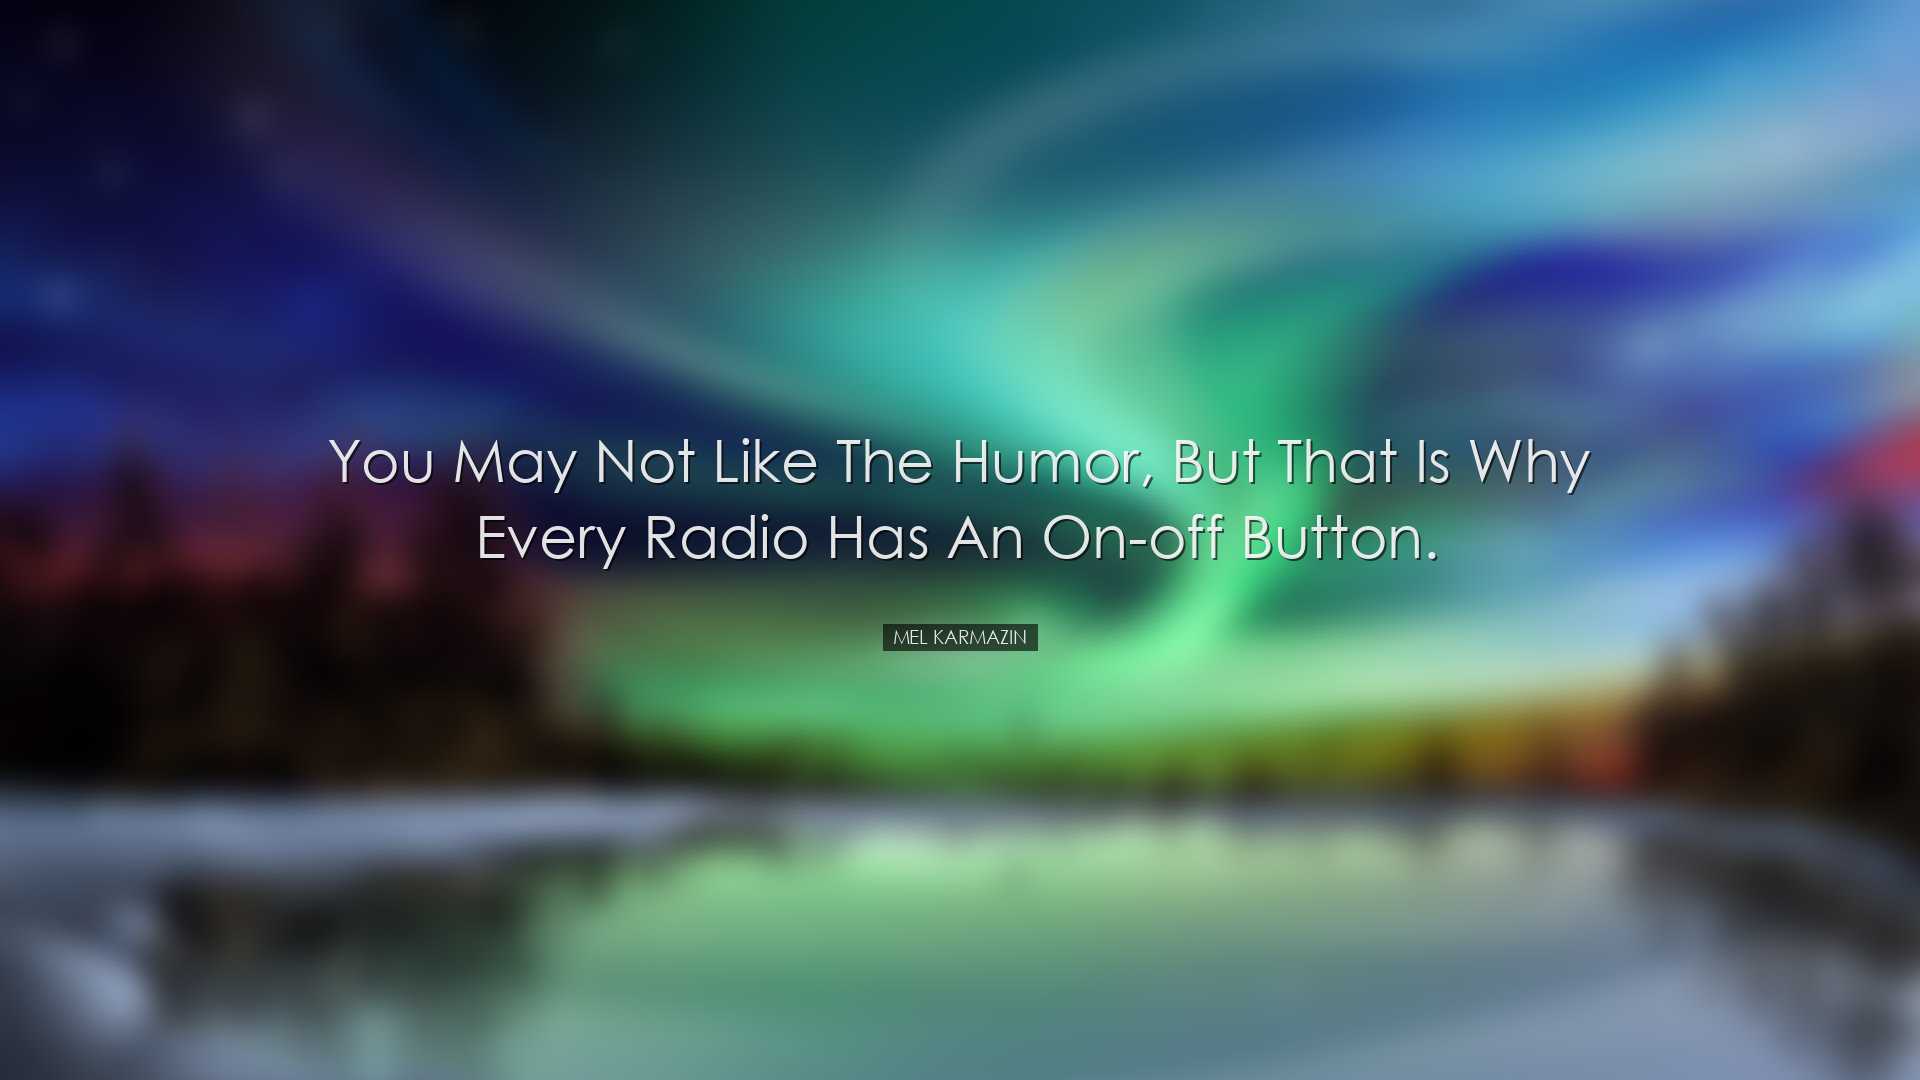 You may not like the humor, but that is why every radio has an on-